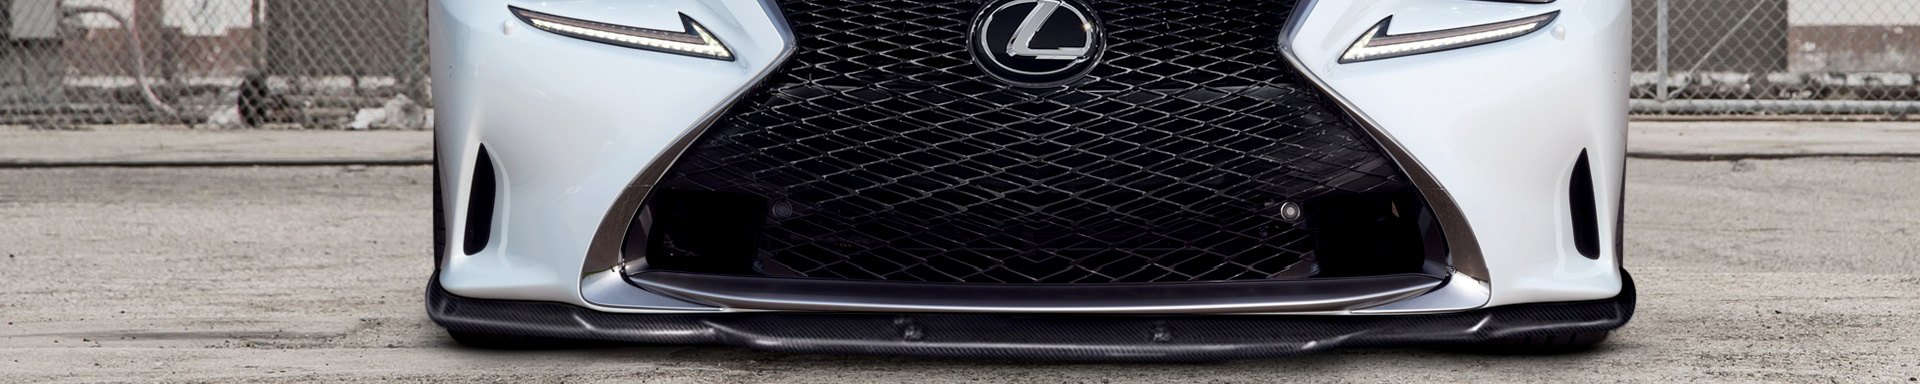 Fresh Line Of Carbon Creations Bumper Spoilers For Lexus RC